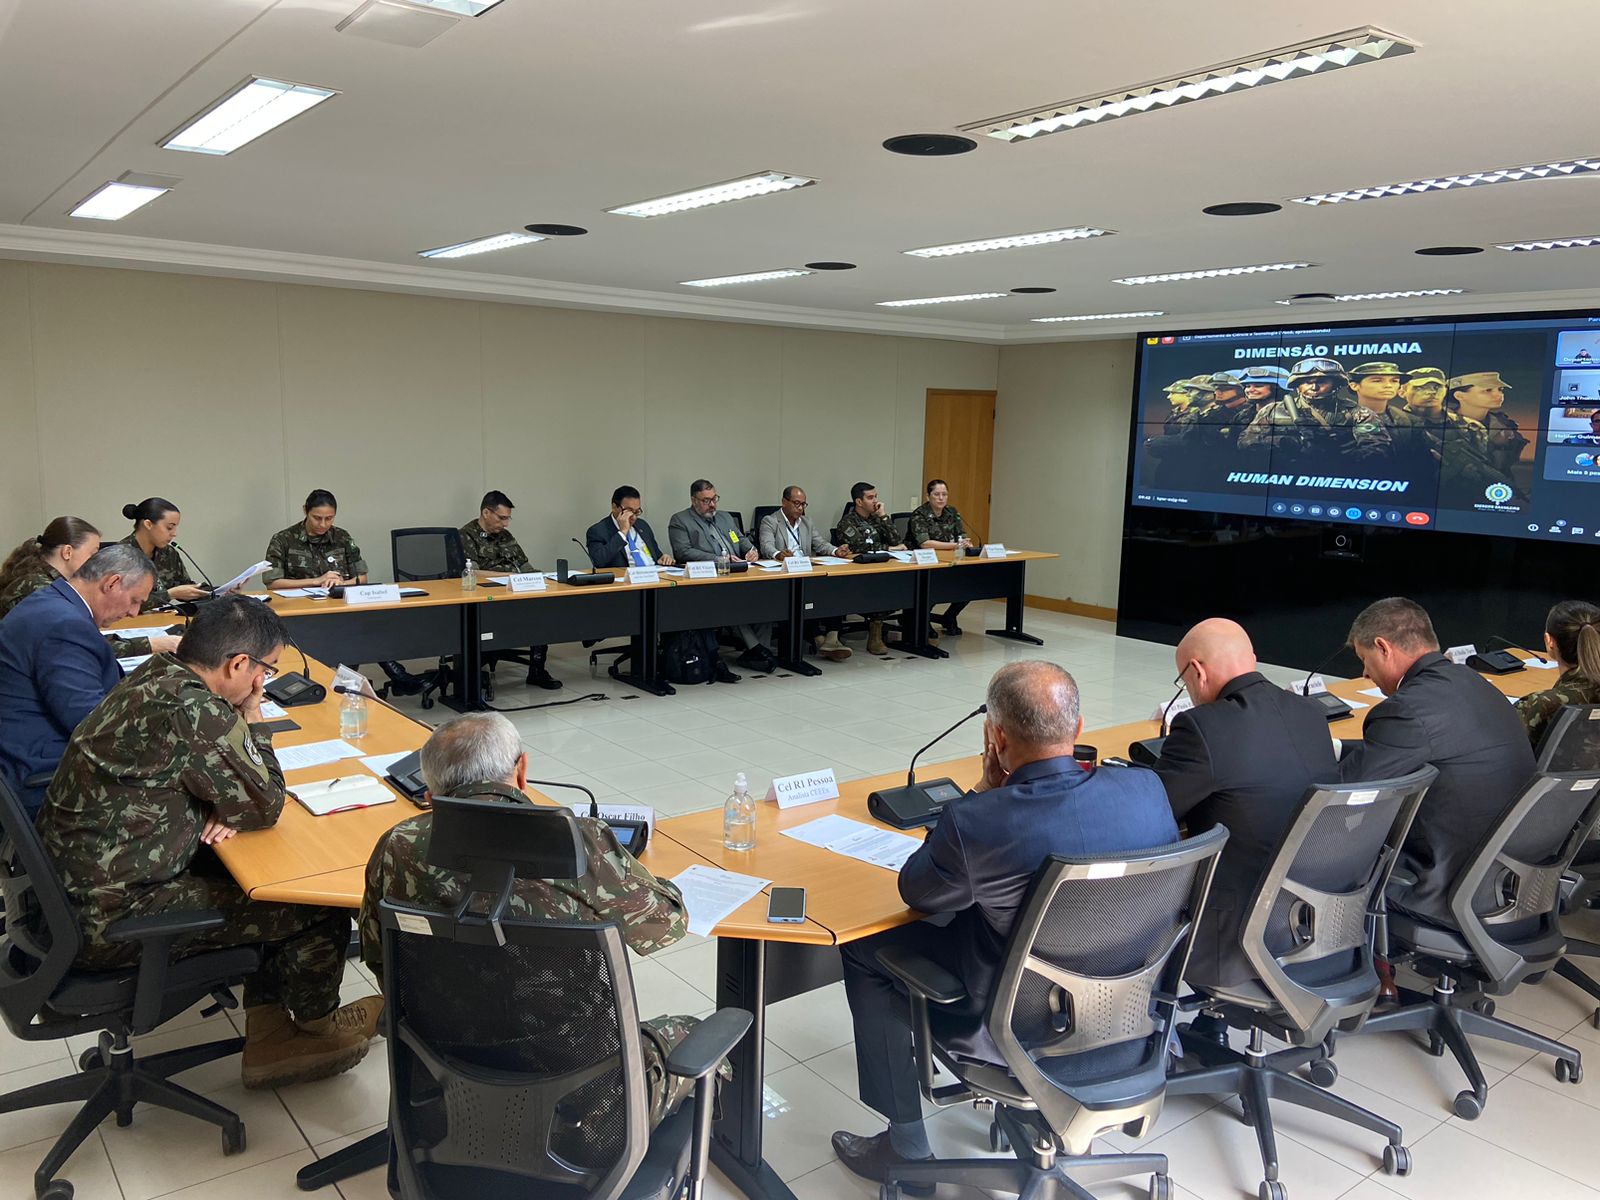 Brazilian Army General Staff holds panel on Leadership and Ethics